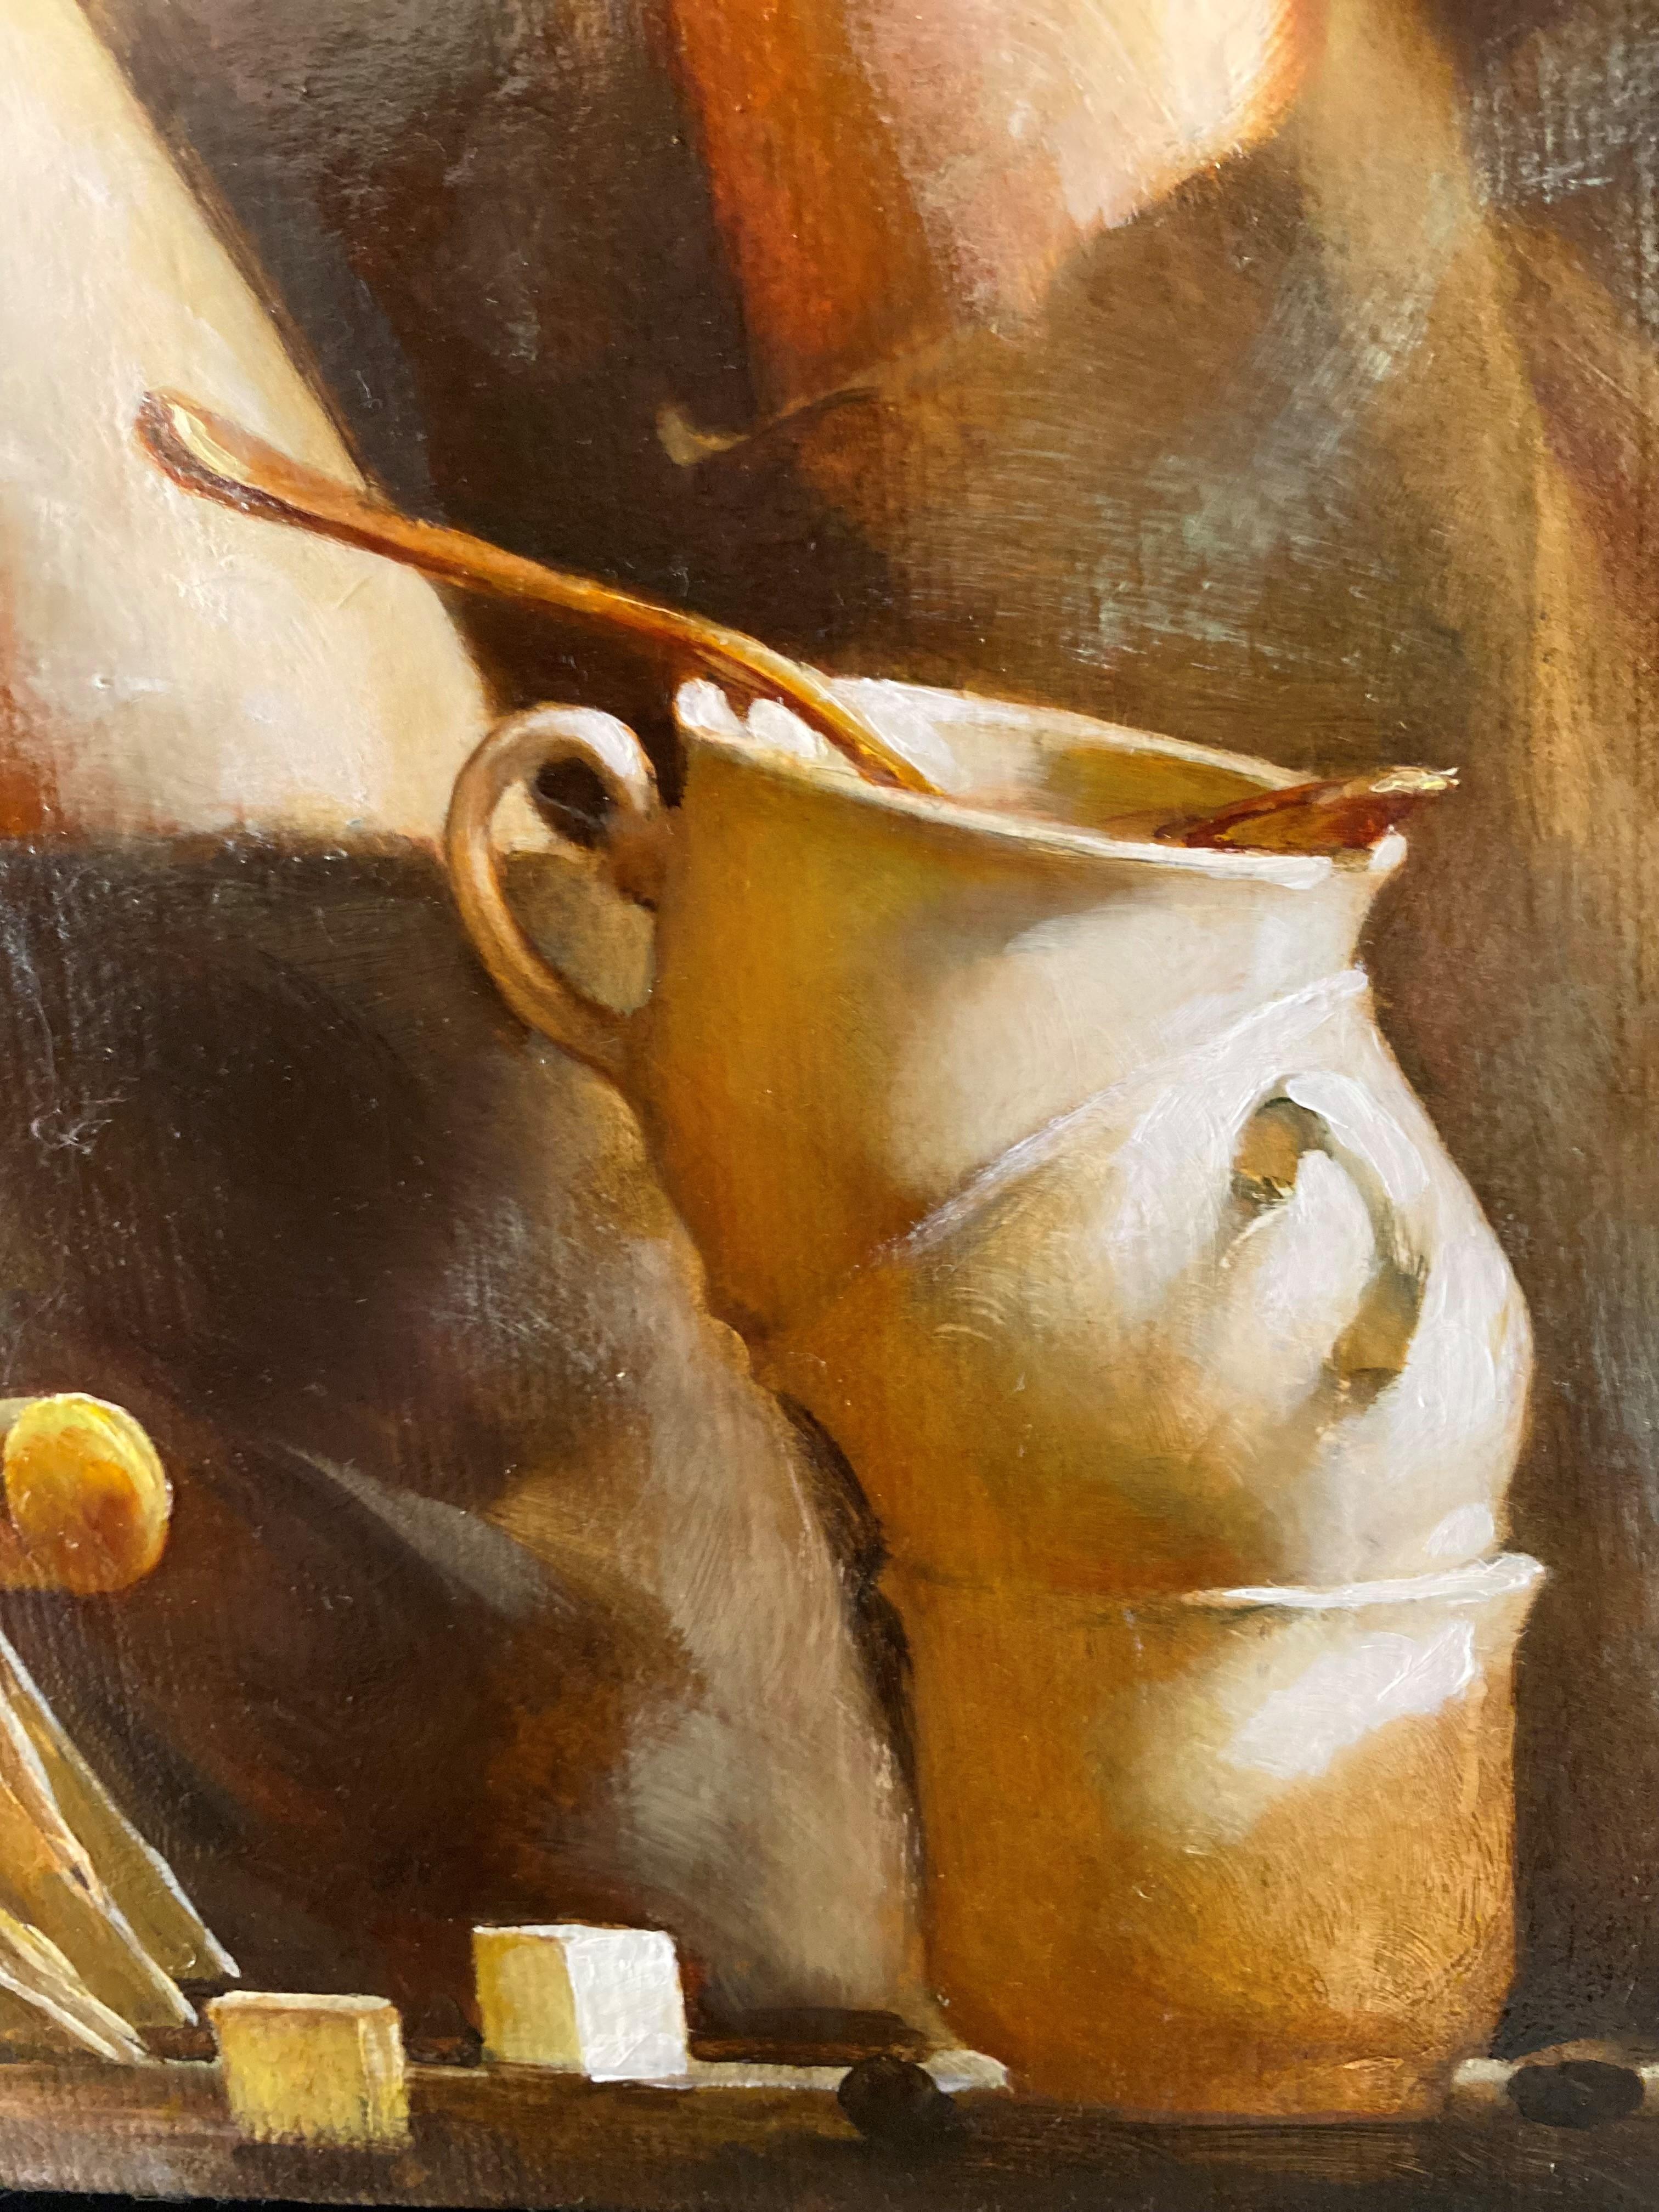  A Cup of Coffee, 2020  - Surrealist Painting by Alexej RAVSKI